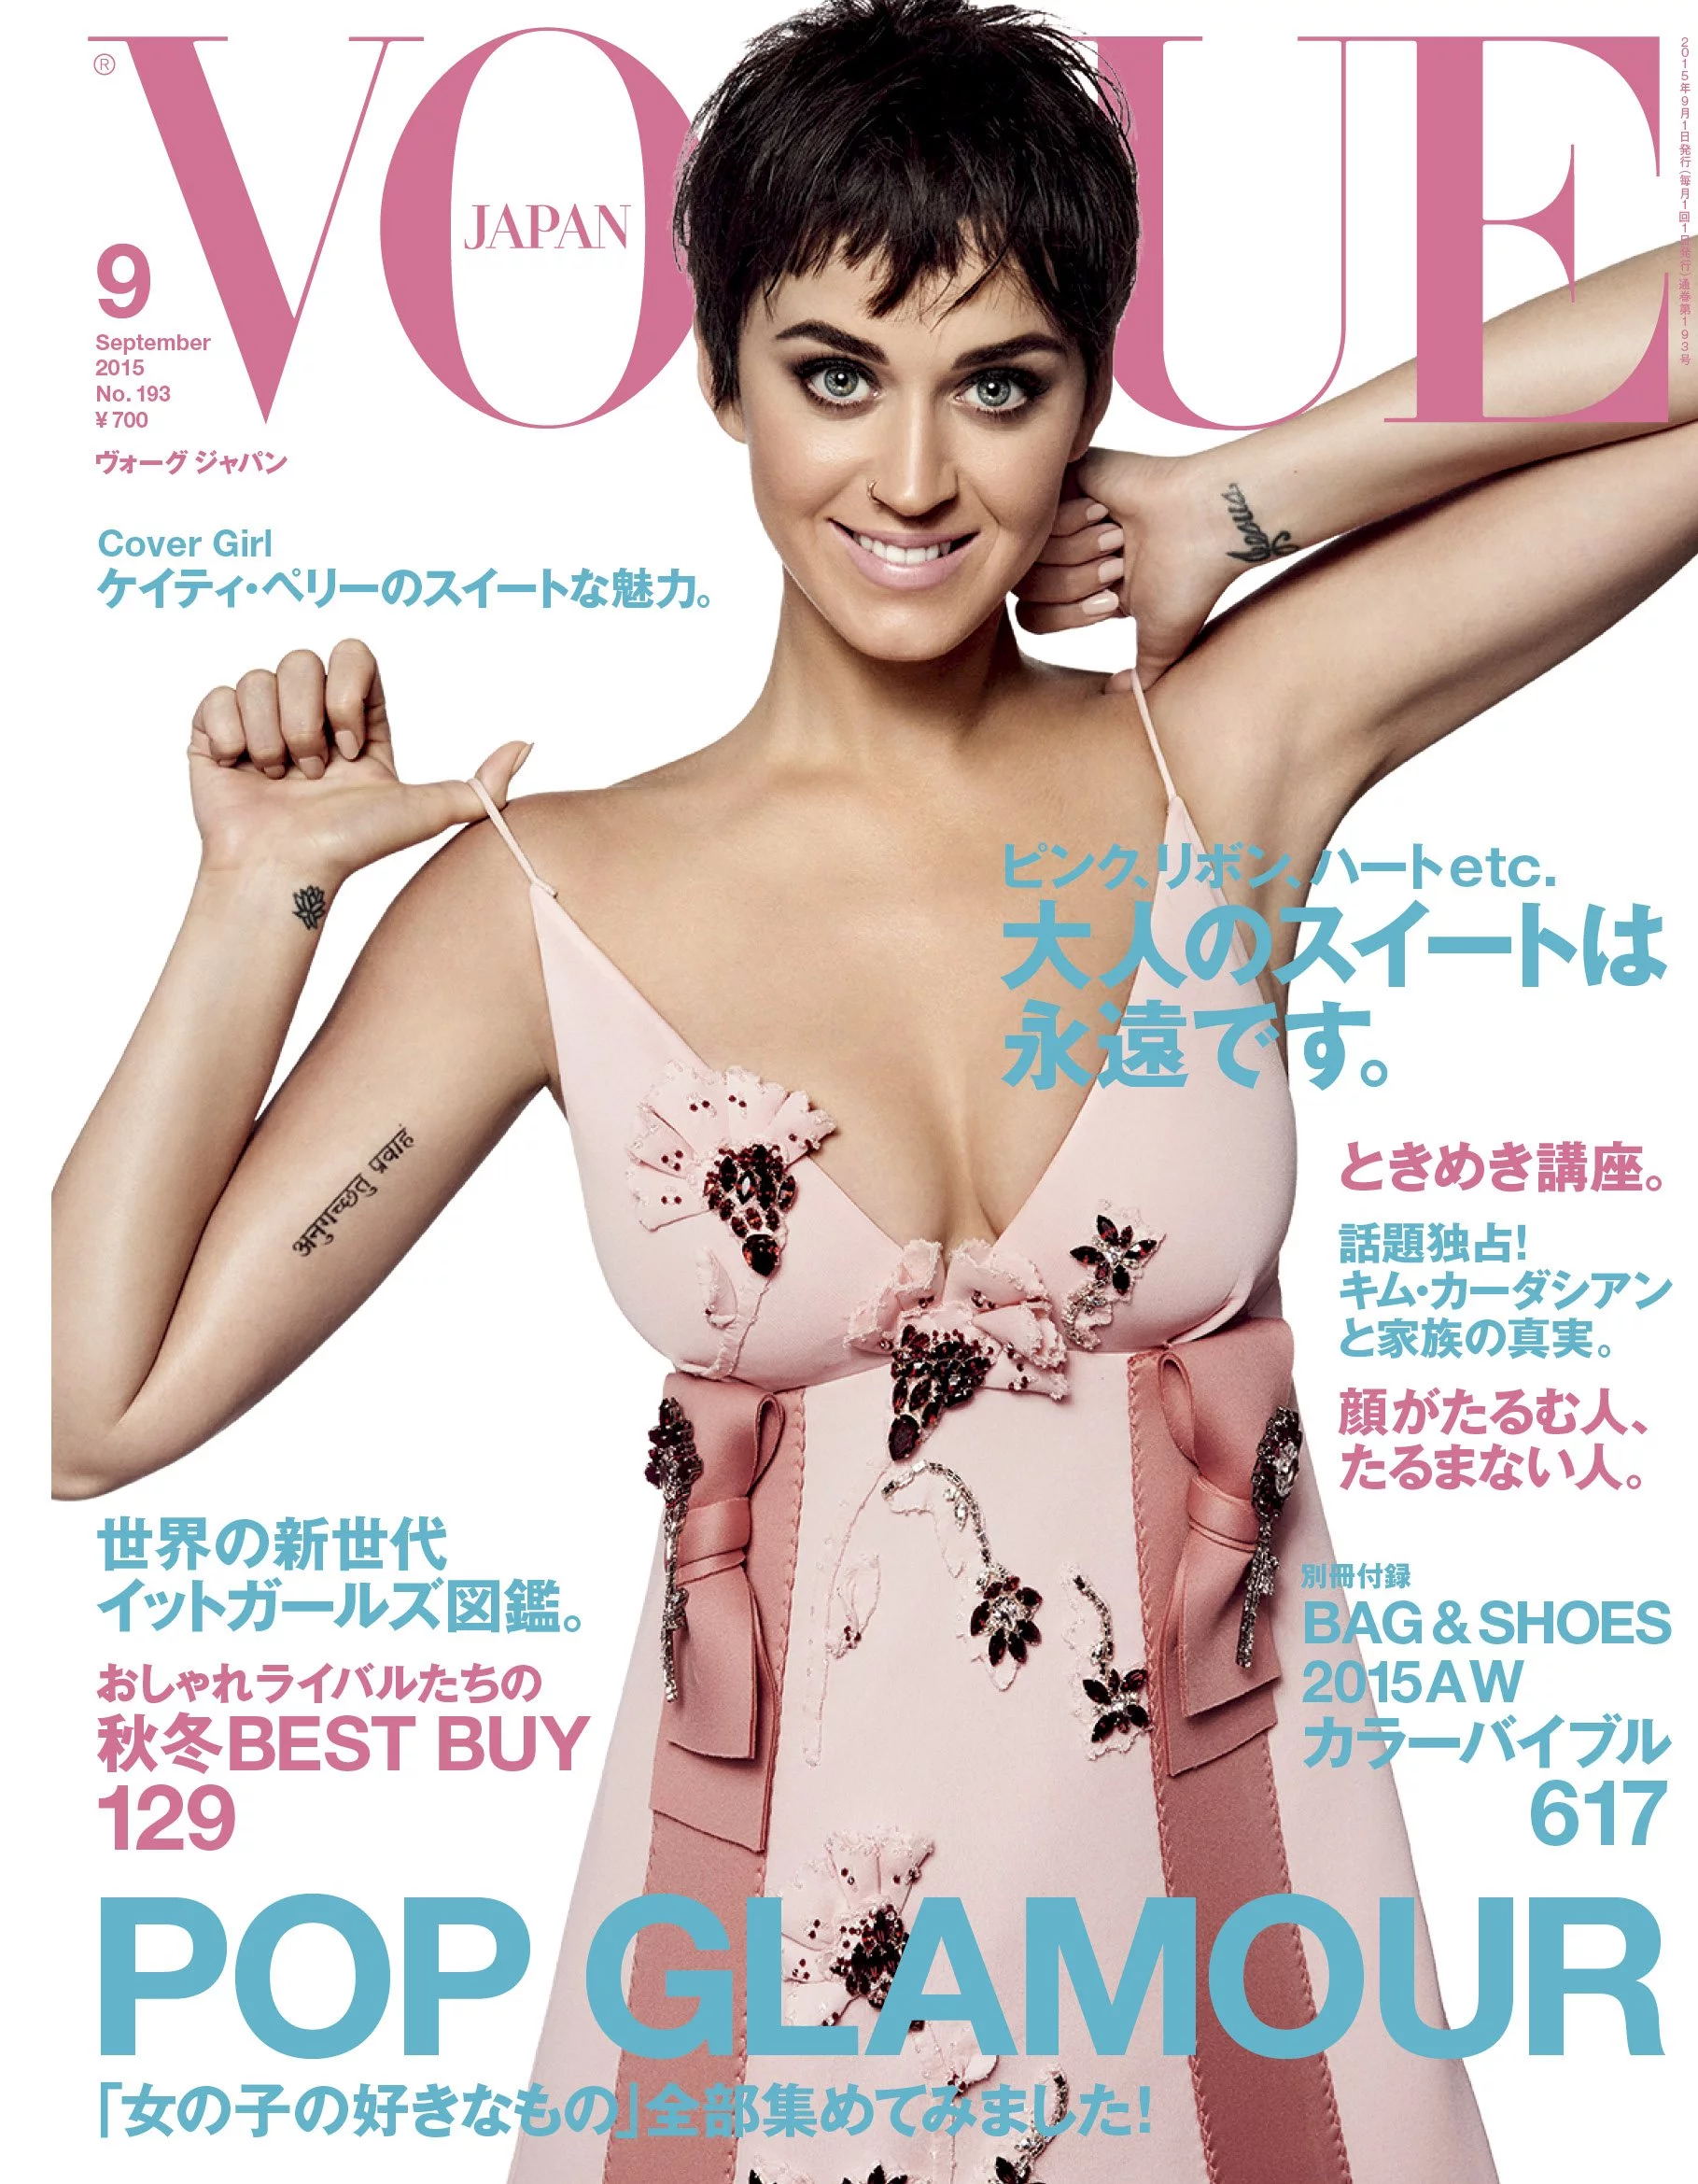 Katy Perry Covers VOGUE Japan - That Grape Juice